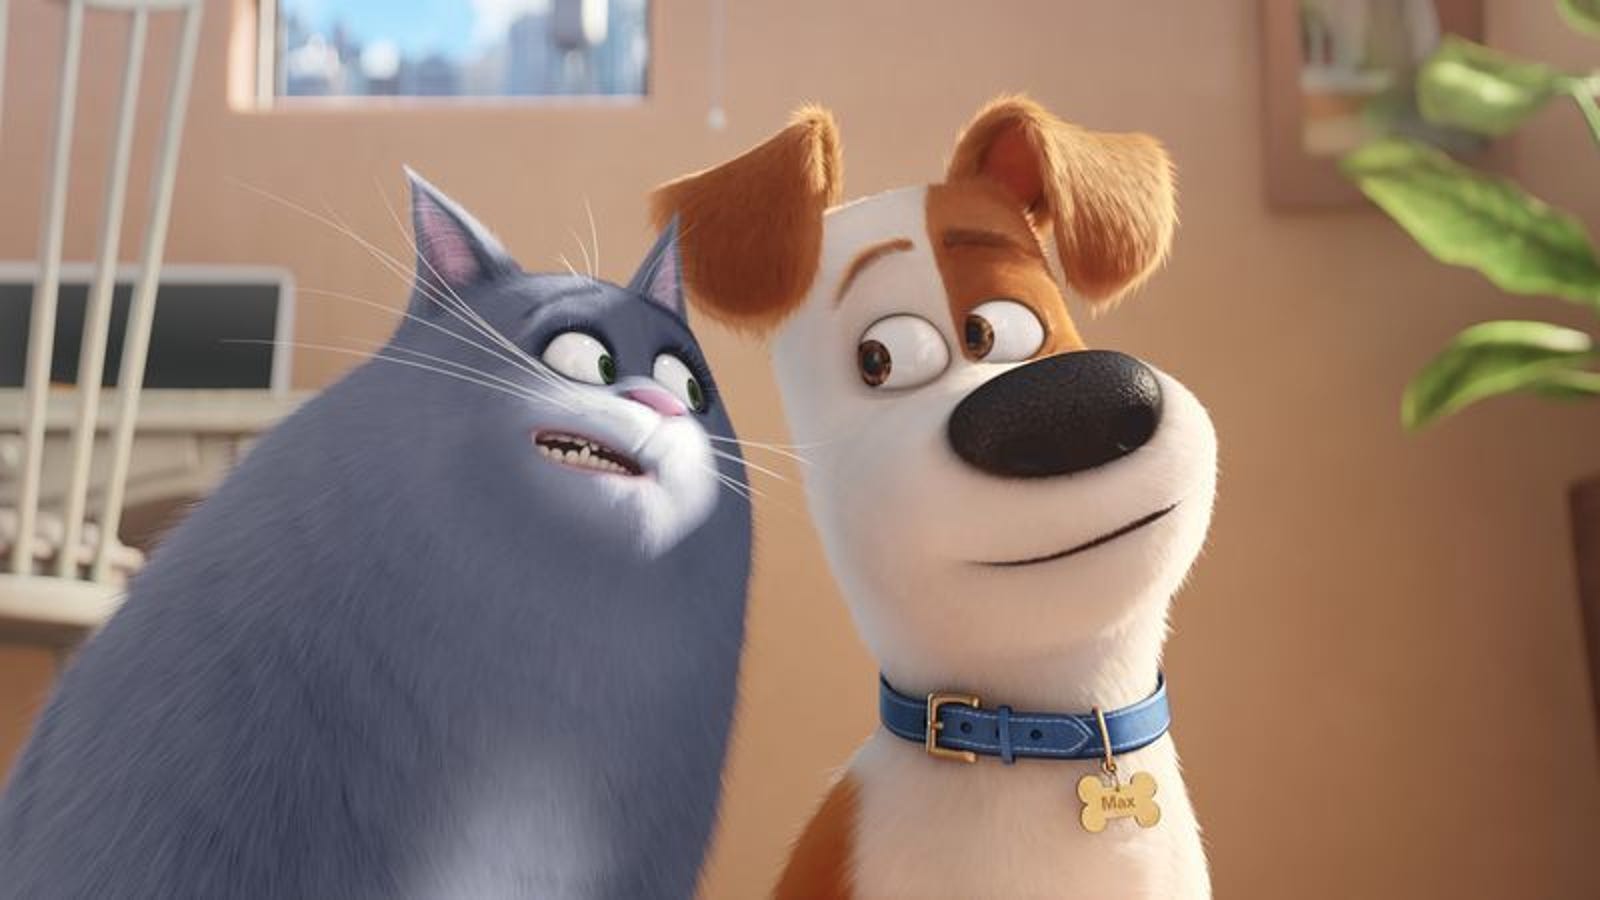 Louis Ck Has Been Fired From The Secret Life Of Pets 2